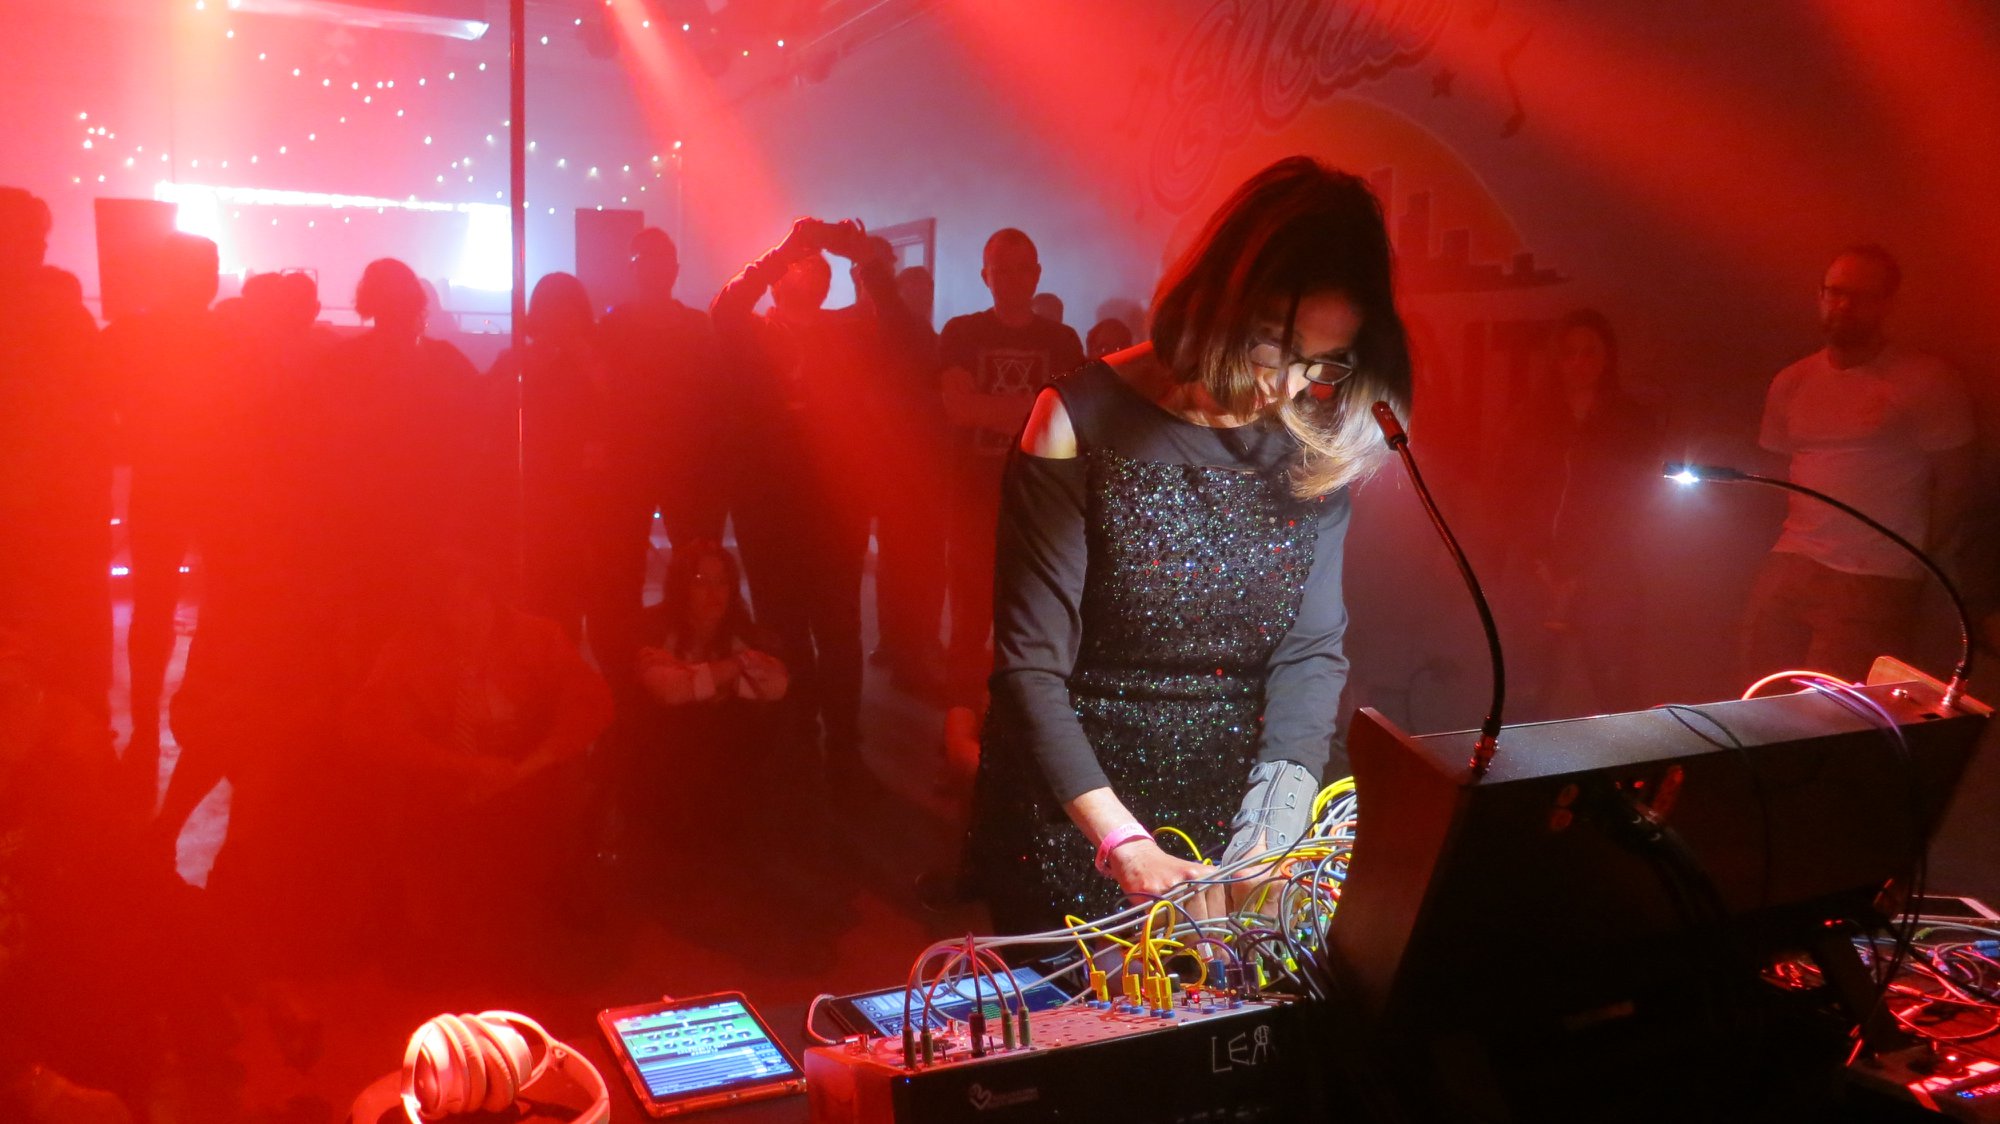 Suzanne Ciani at The End, Detroit